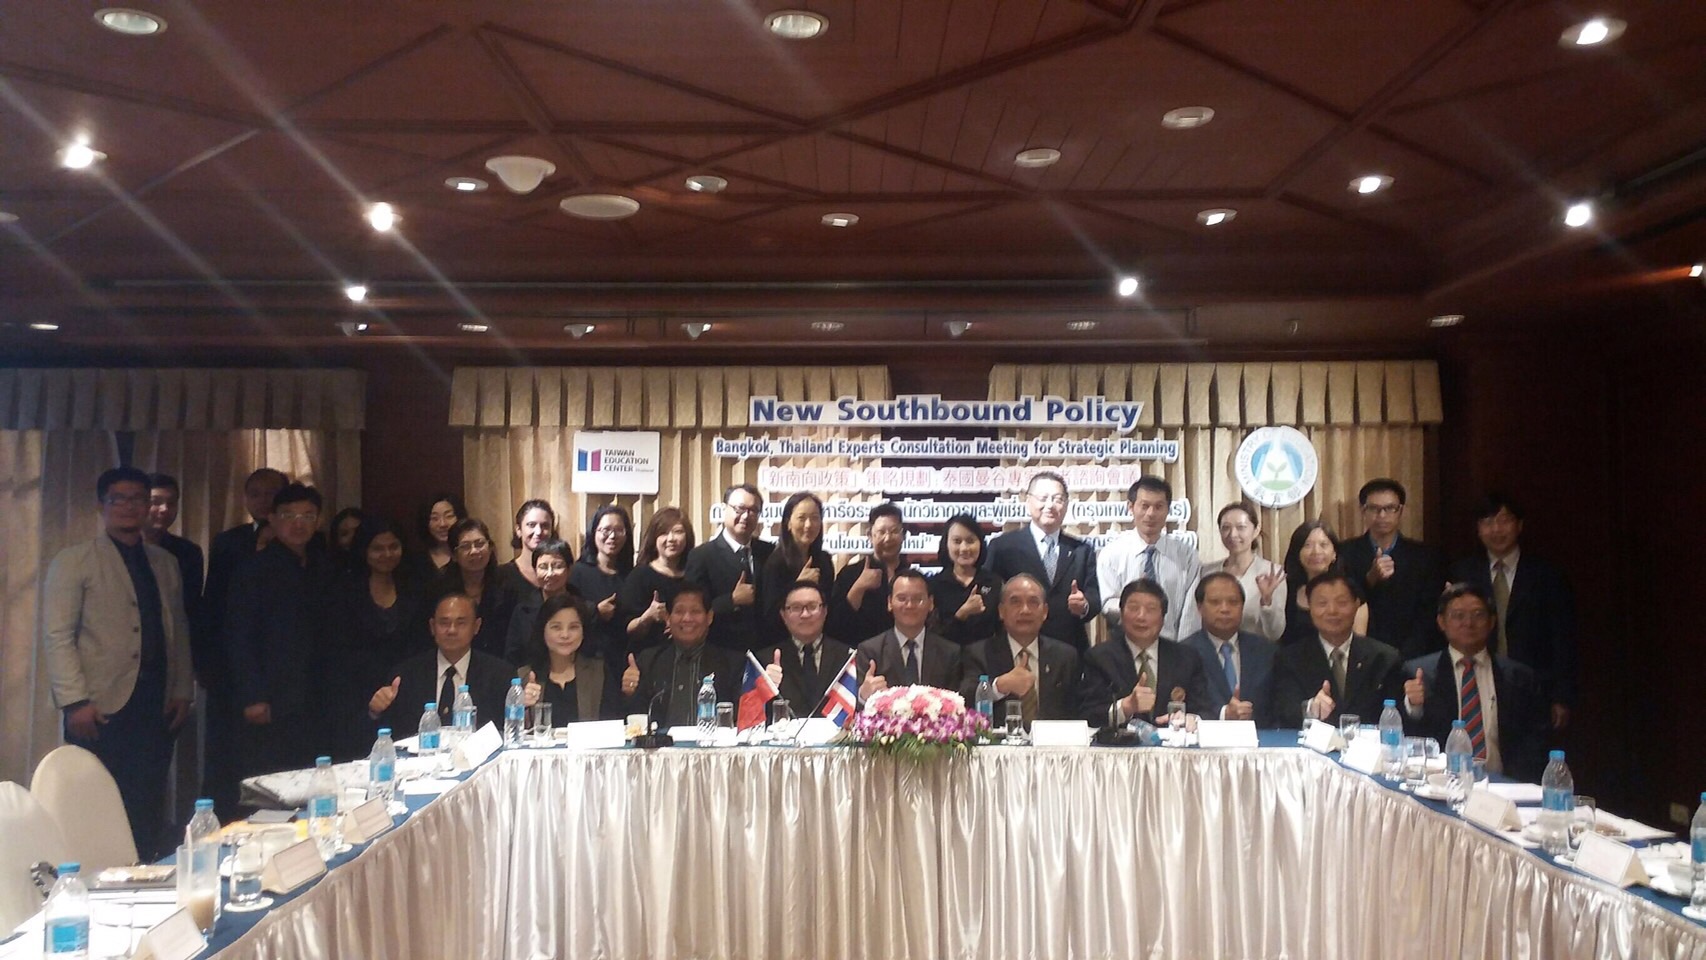 Thai Expert Consultation Meetings for Strategic Planning for the New Southward Policy held in Bangkok and Chiangmai